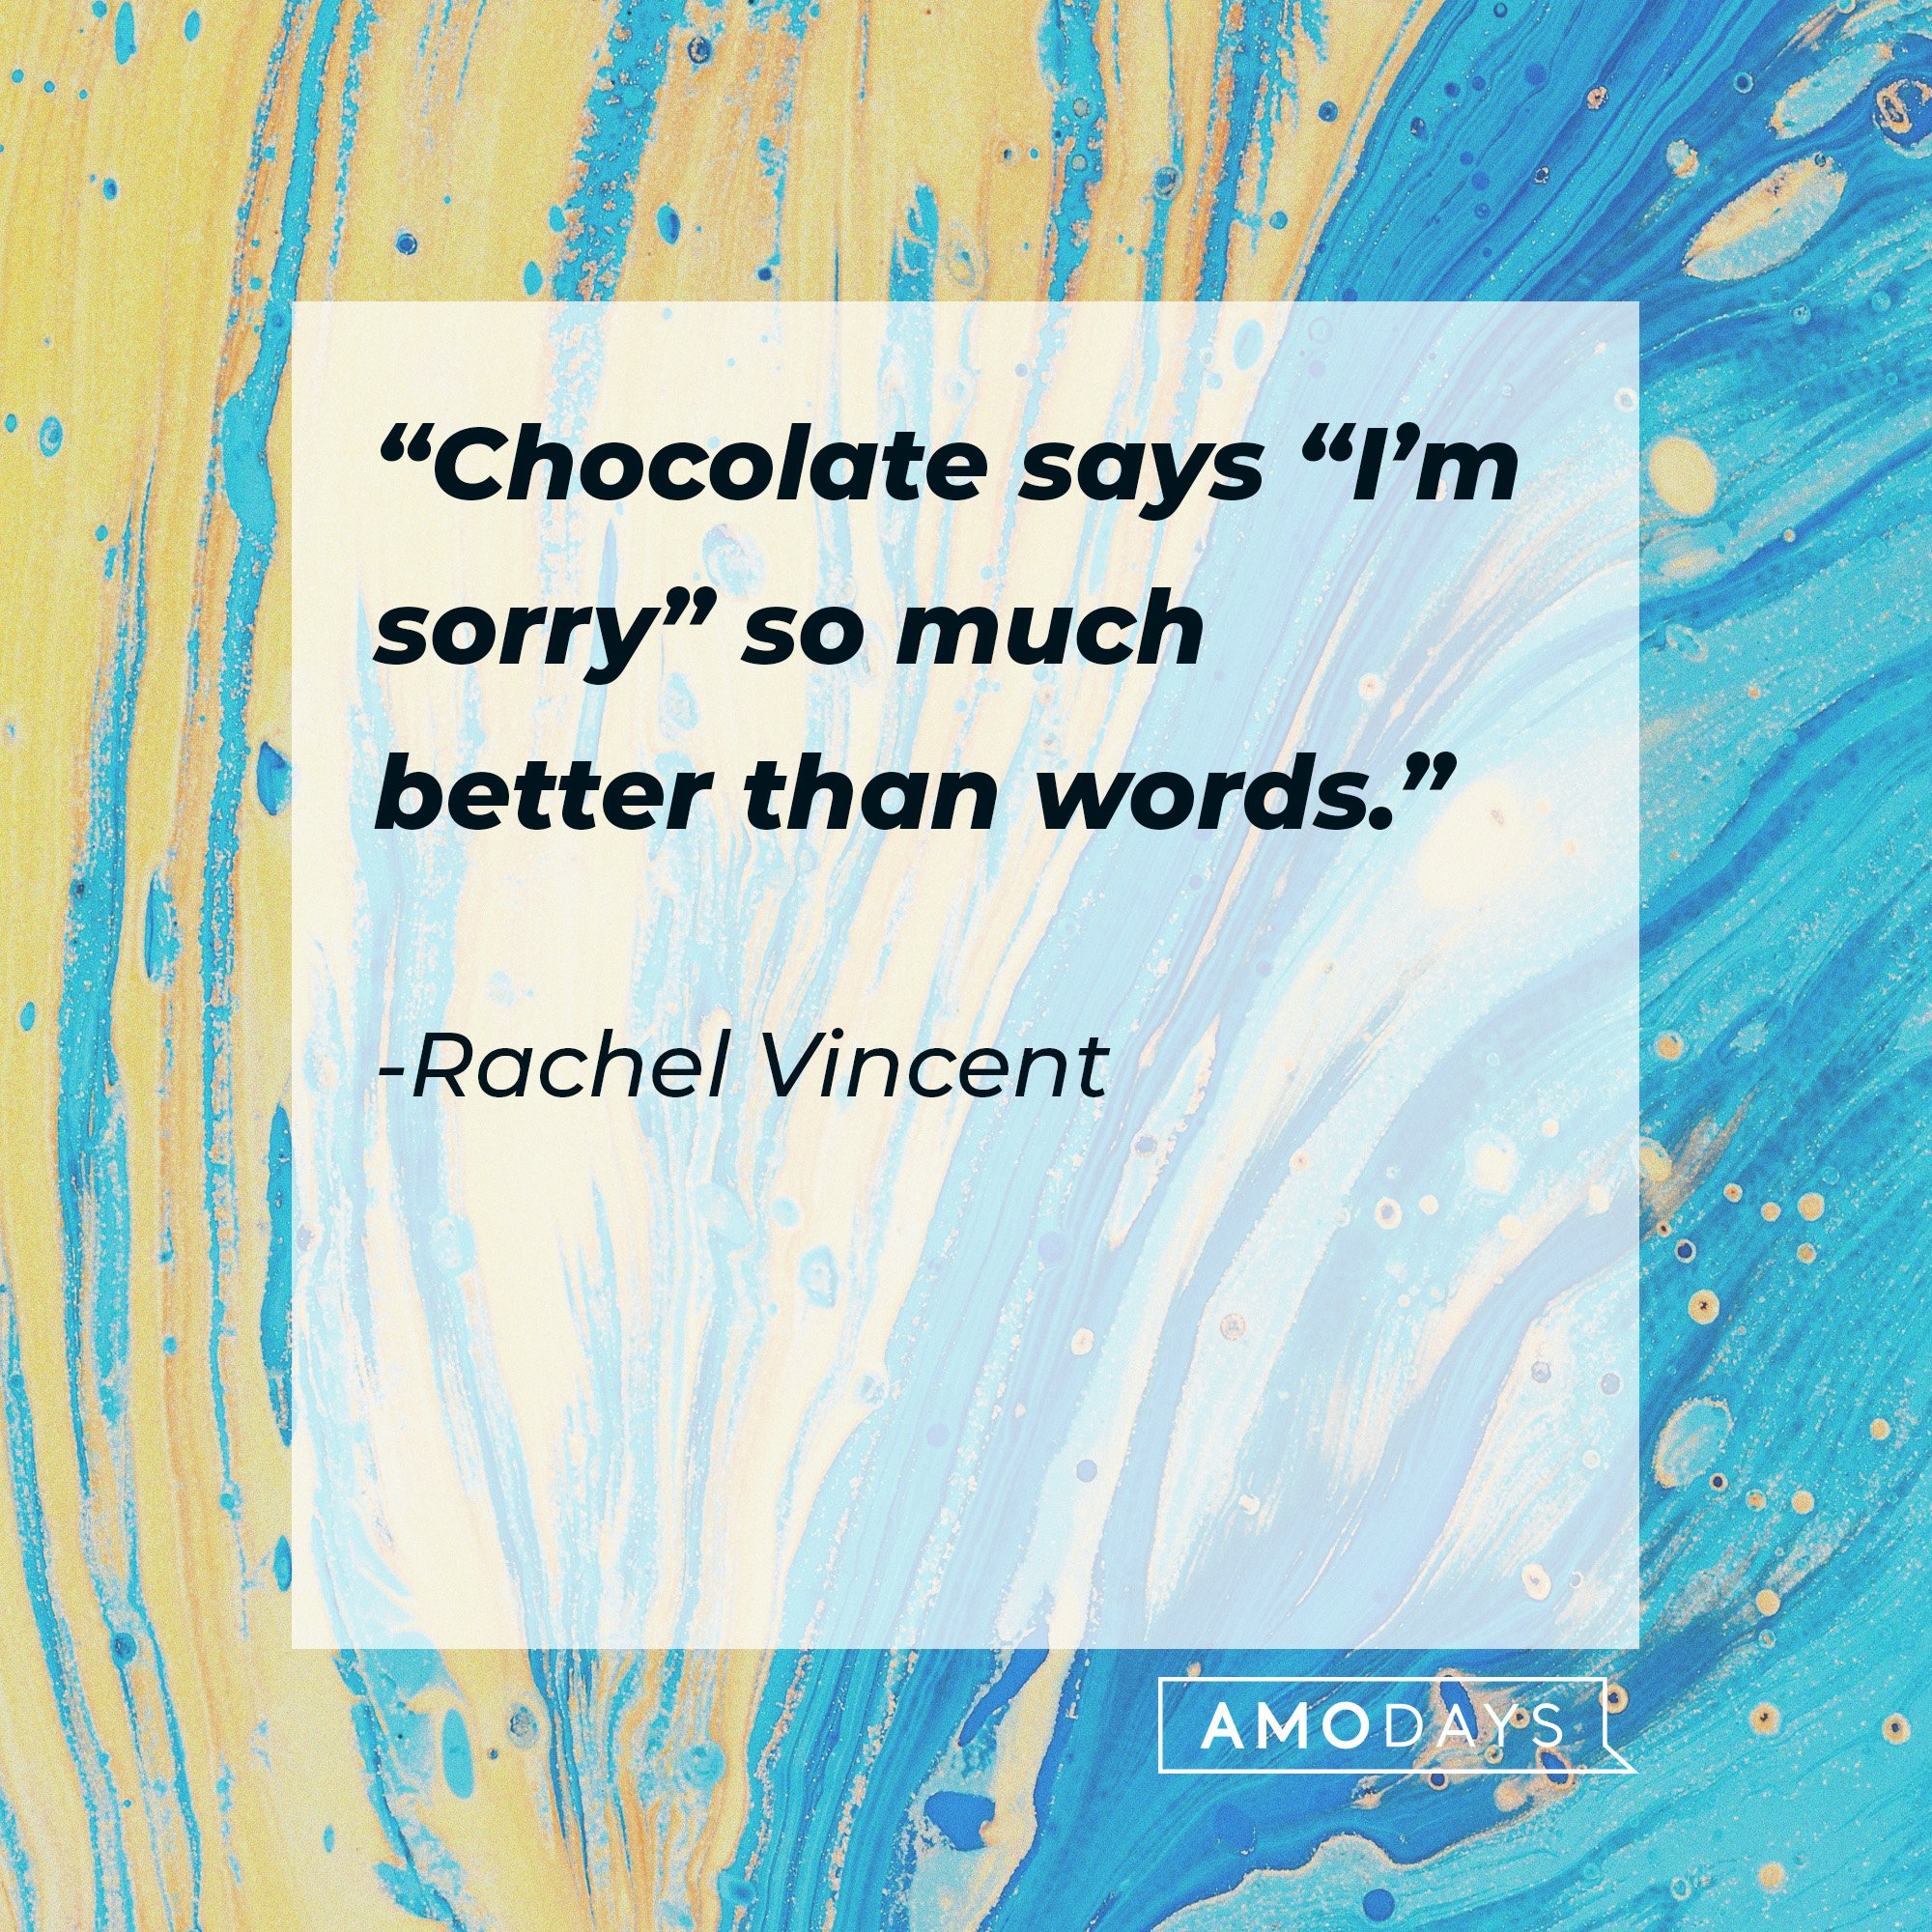 “Chocolate says “I’m sorry” so much better than words.” | Image: AmoDays